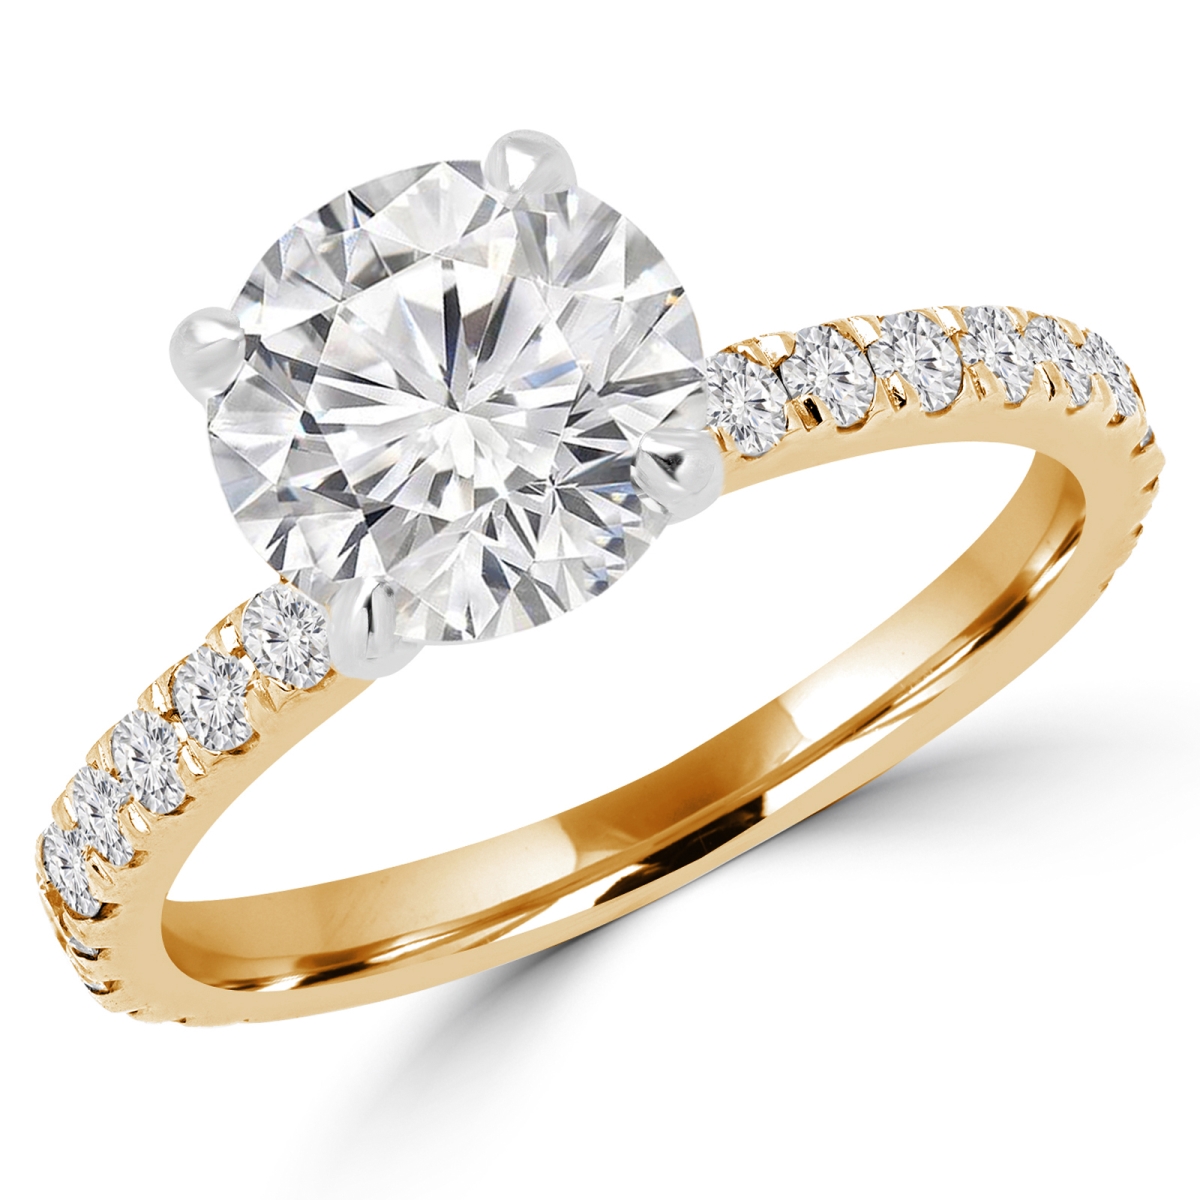 Picture of Majesty Diamonds MD160340-7.5 1 CTW Round Cut Diamond Multi Stone Engagement Ring in 14K Yellow Gold - Size 7.5